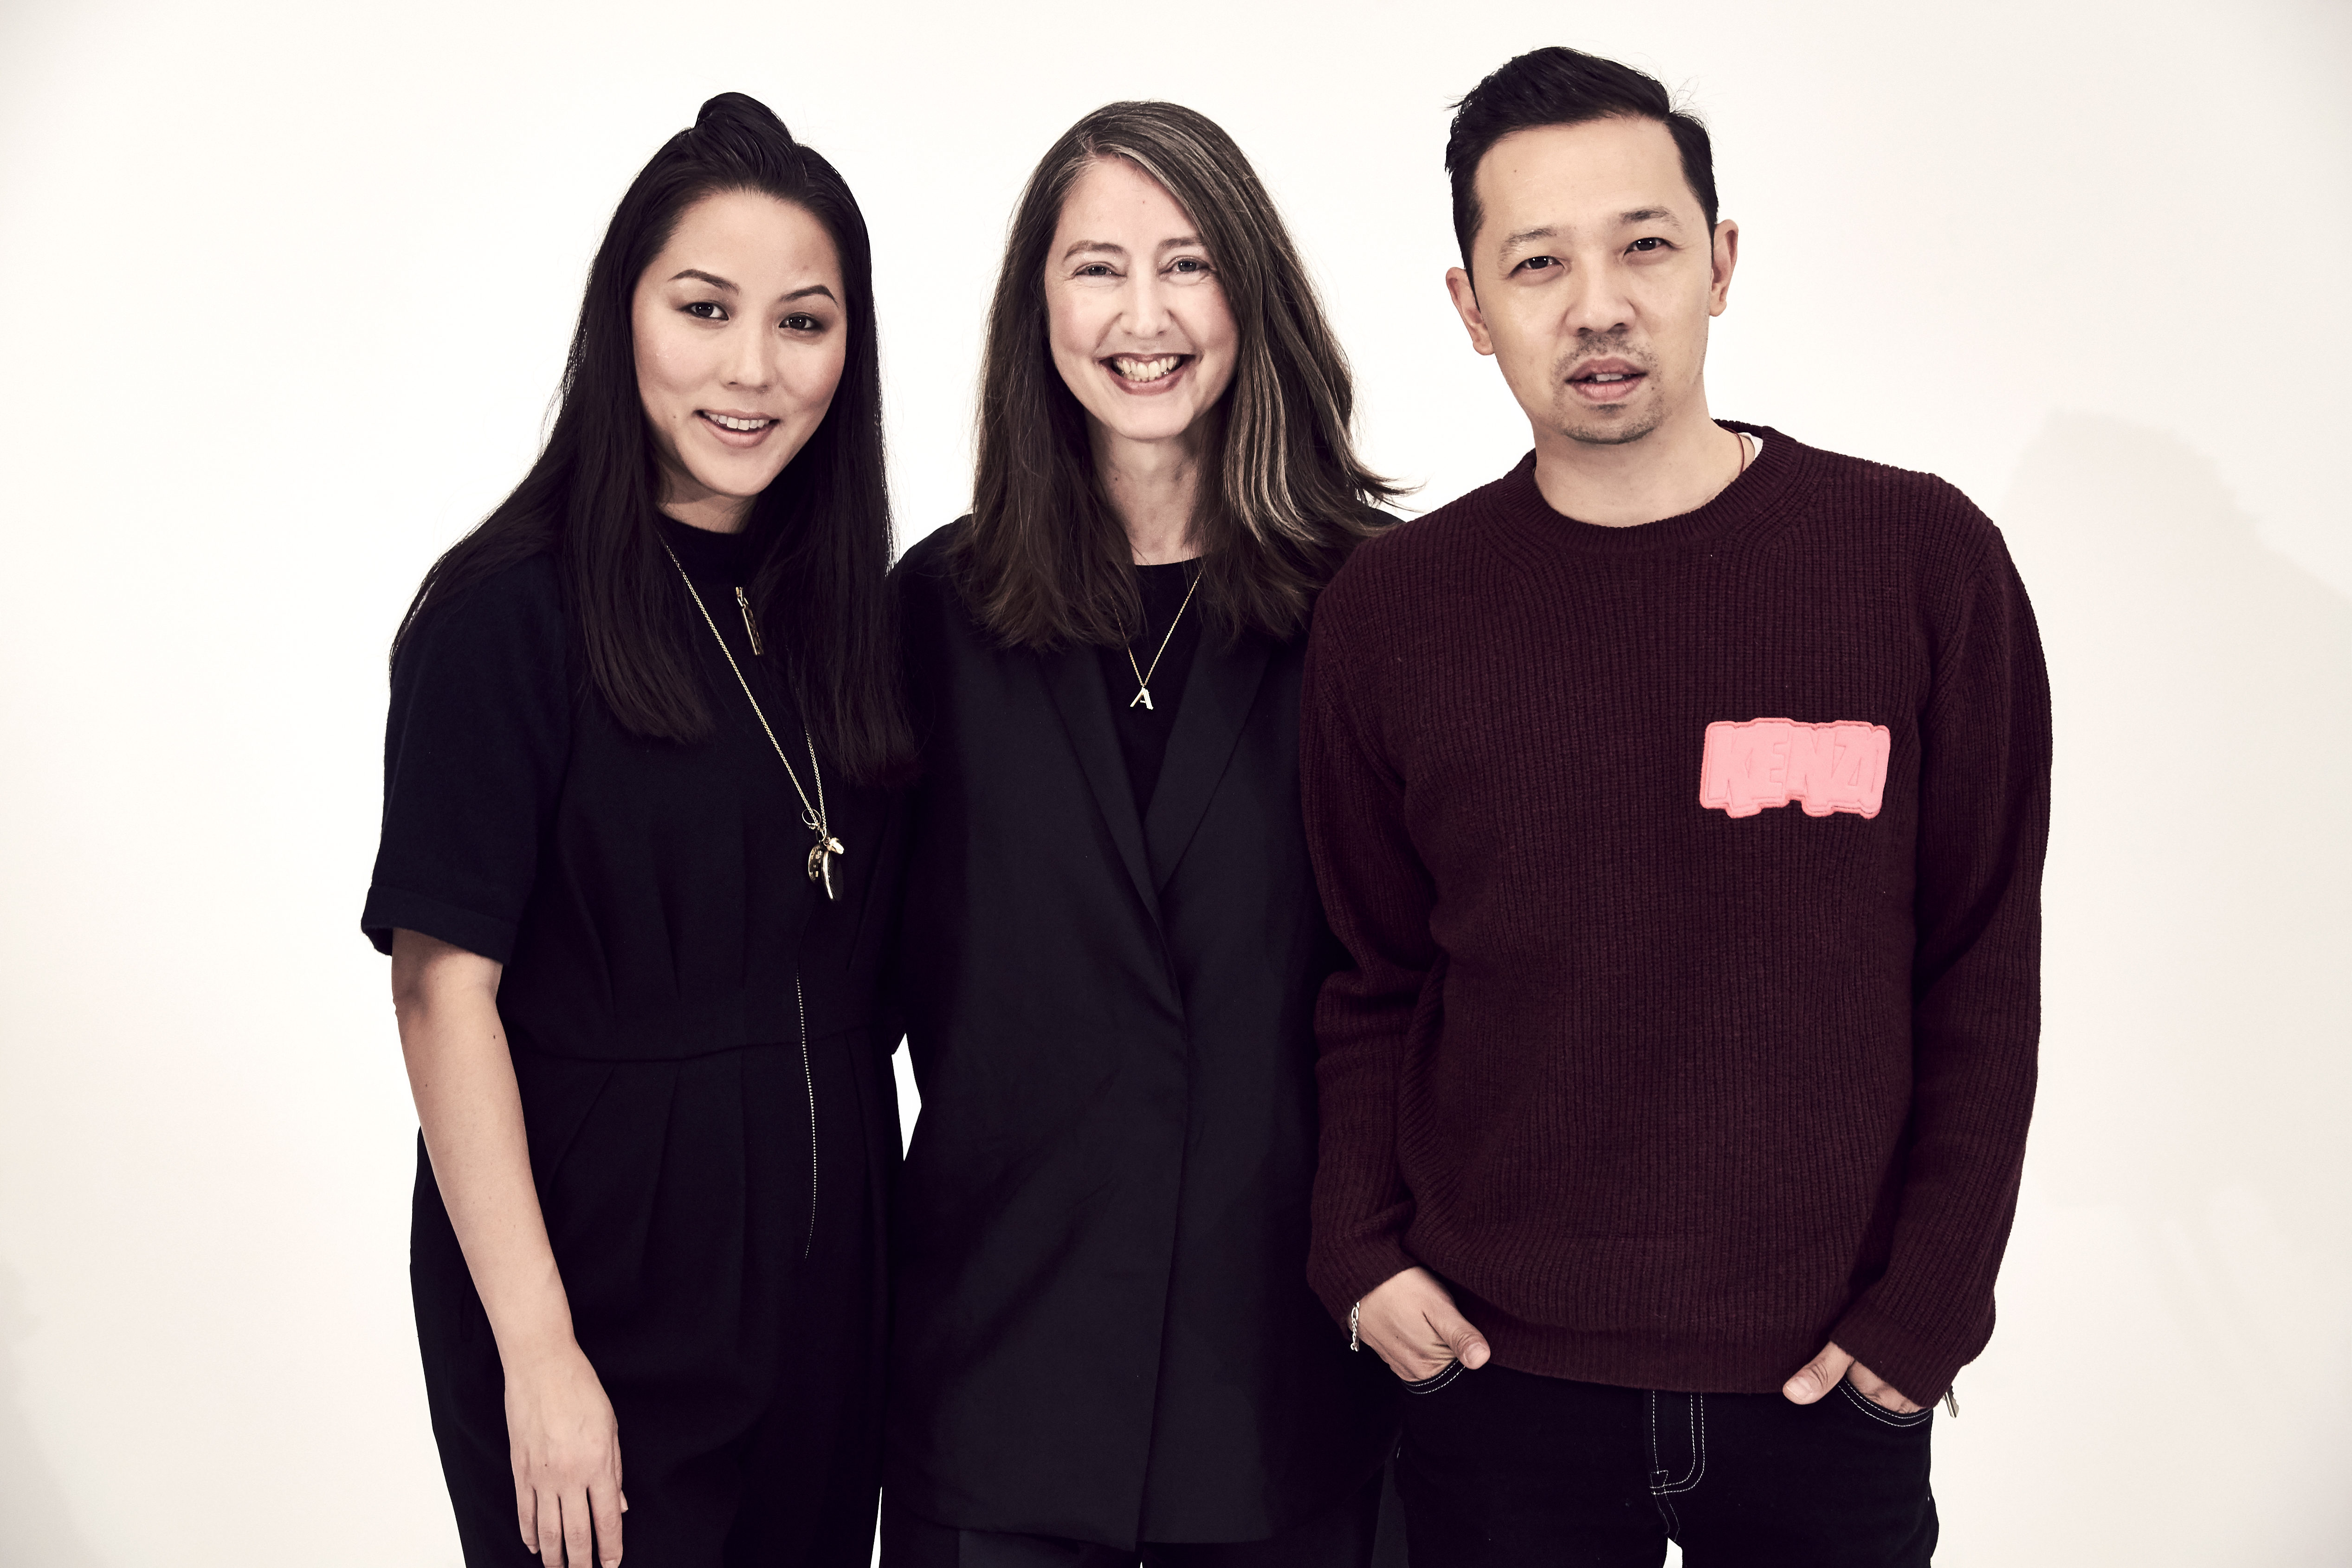 KENZO's Carol Lim & Humberto Leon Team Up with H&M - Daily Front Row